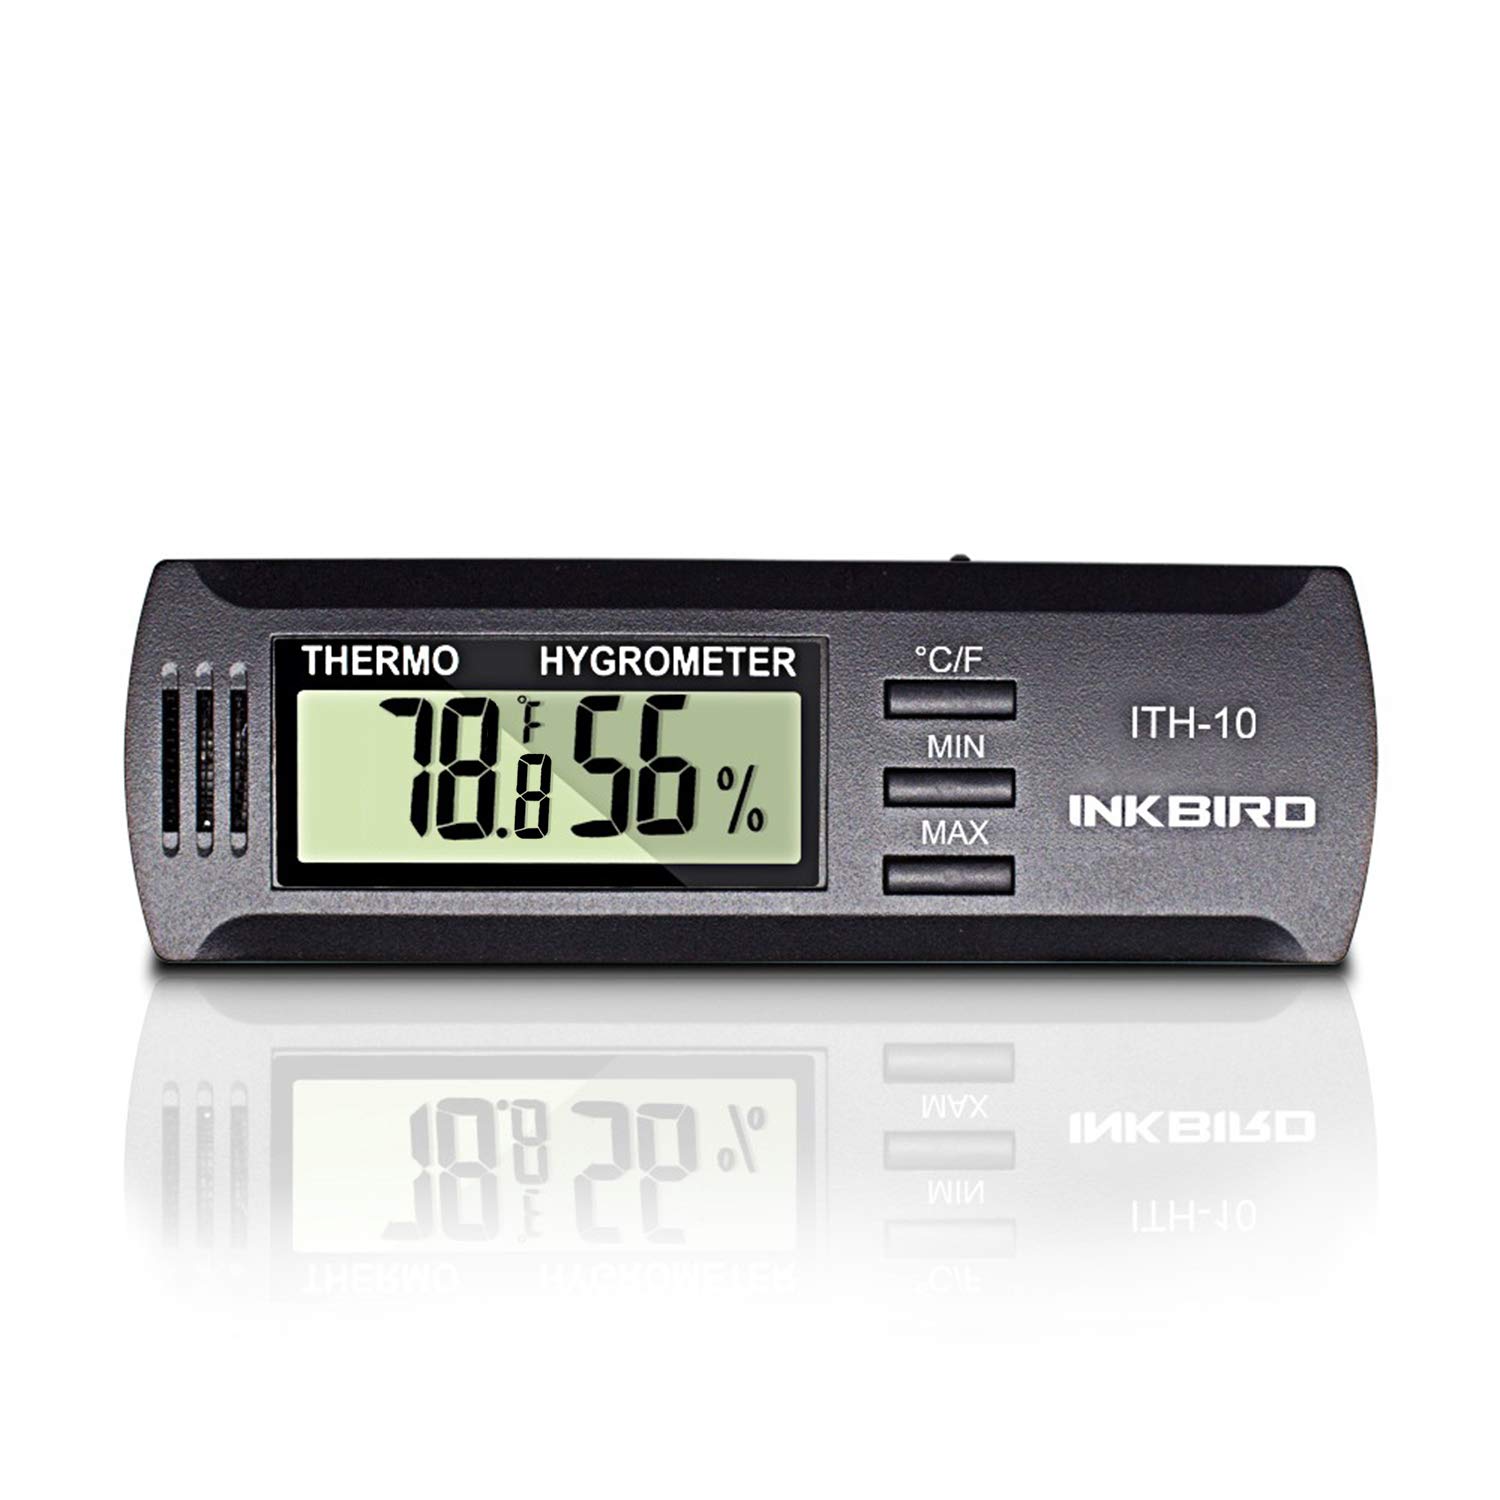 Inkbird ITH-10 Digital Thermometer and Hygrometer [...]